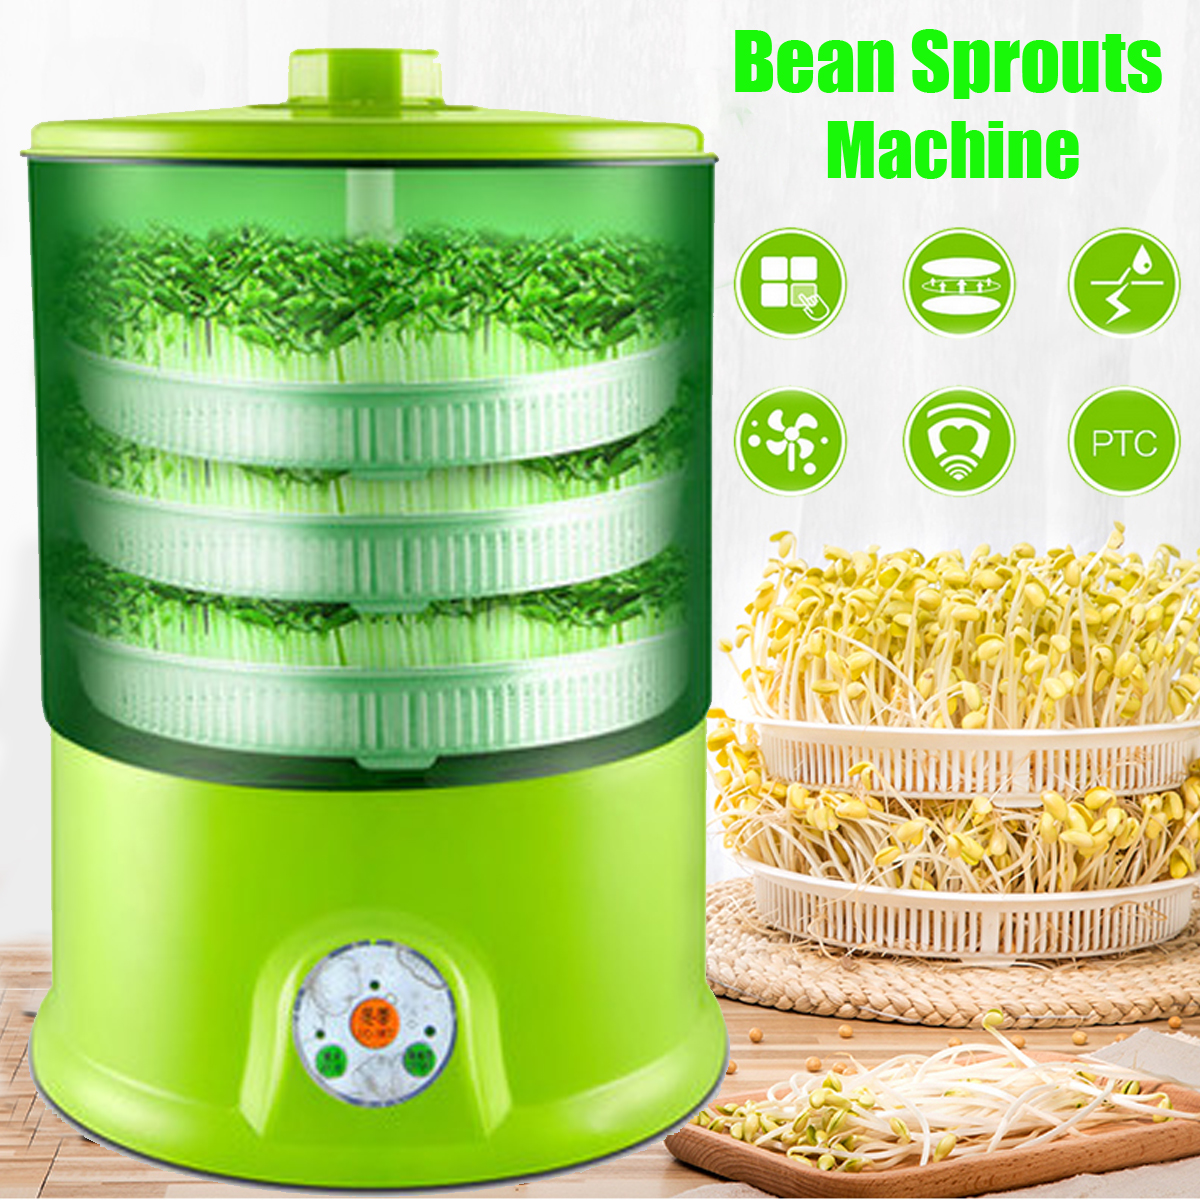 Homemade Automatic Bean Seed Sprouts Machine Easy to Operation Bean Sprout Maker 